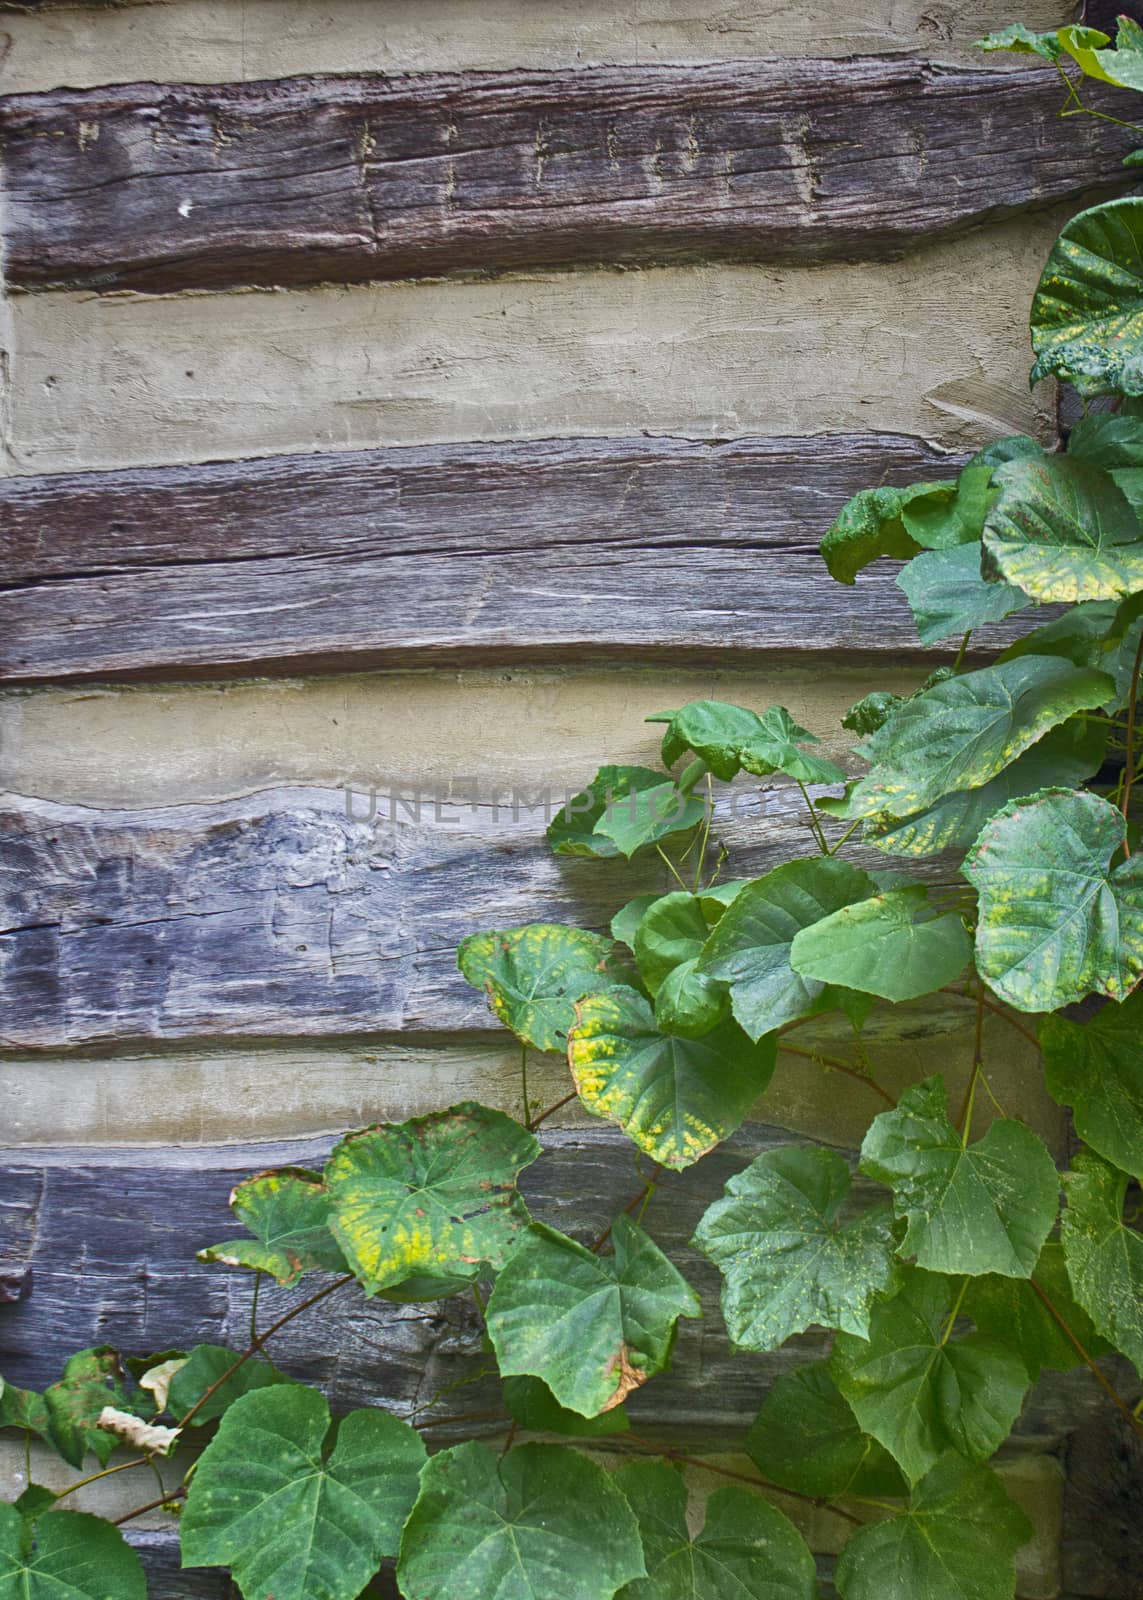 Log Cabin with Grape Vines on Wall by CharlieFloyd